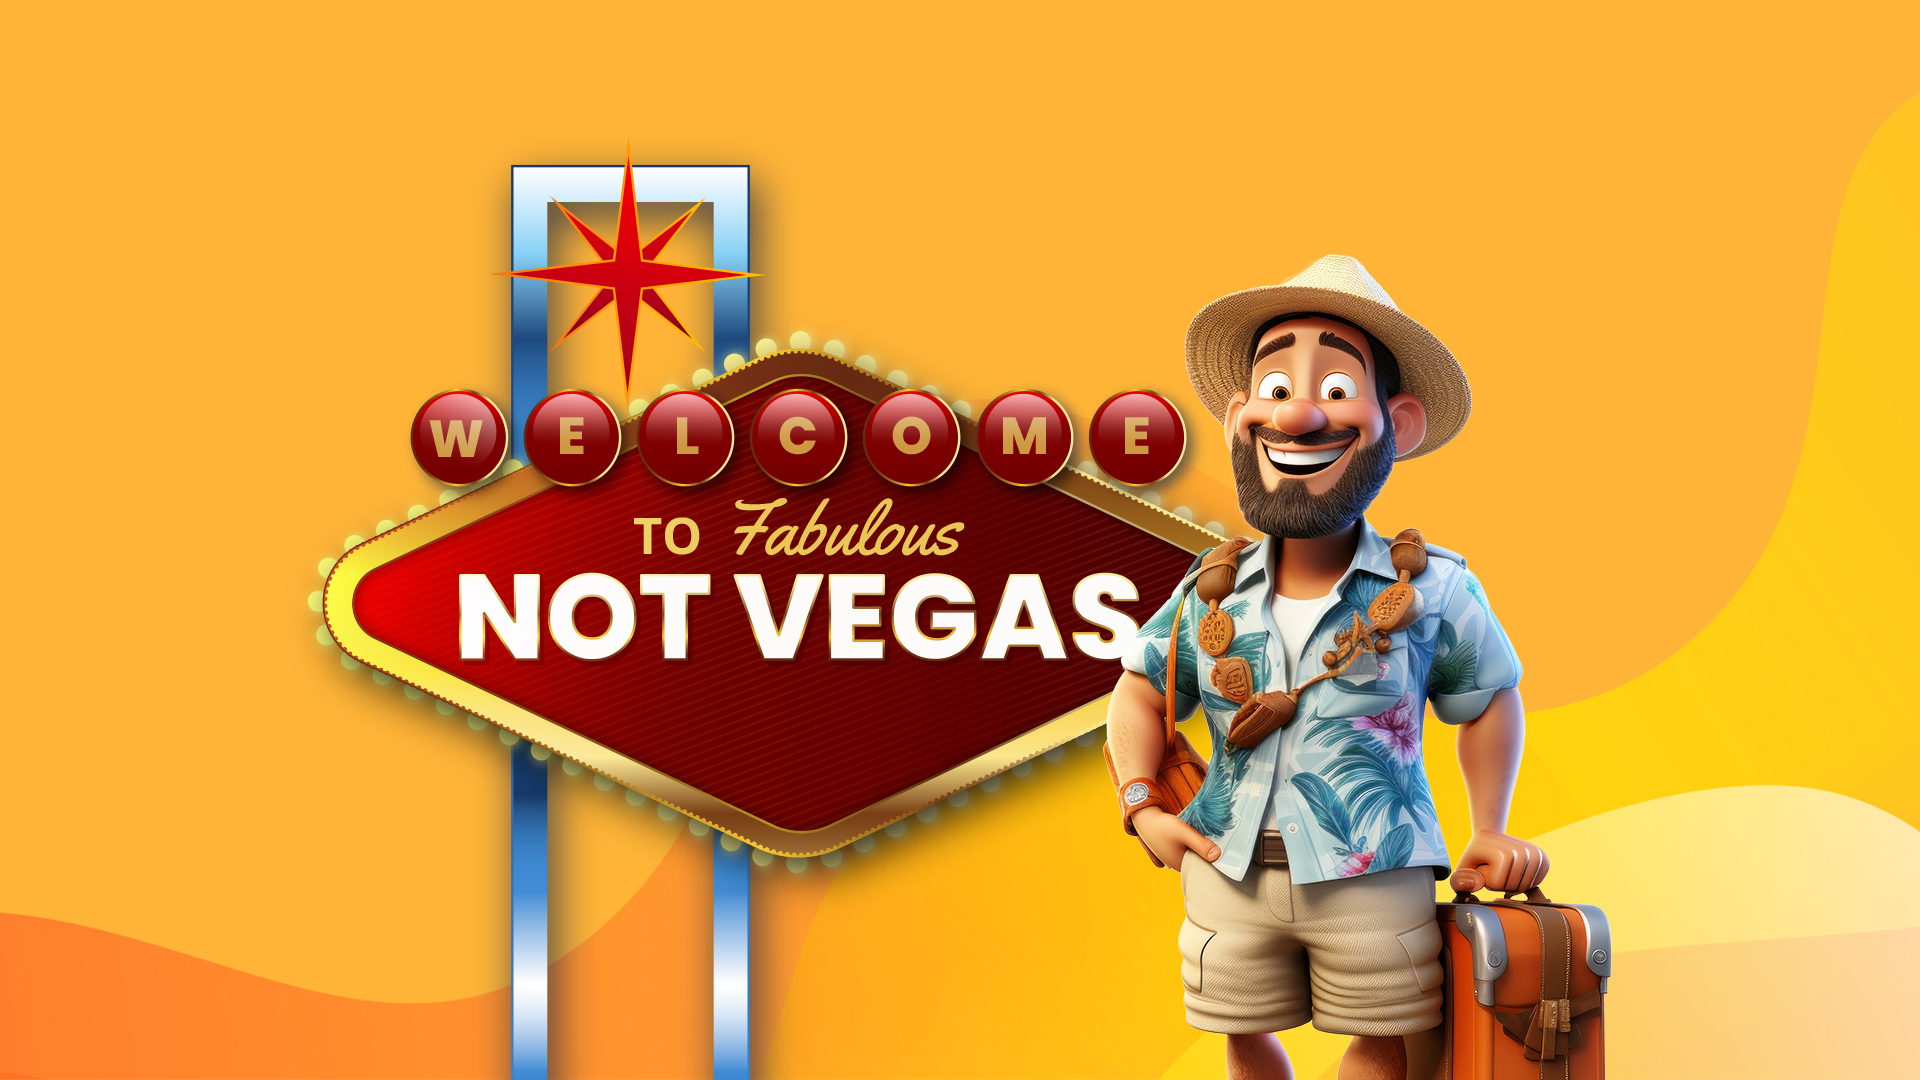 A cartoon man with a suitcase stands next to a red sign that reads ‘Welcome to Fabulous NOT VEGAS’ over a yellow background.